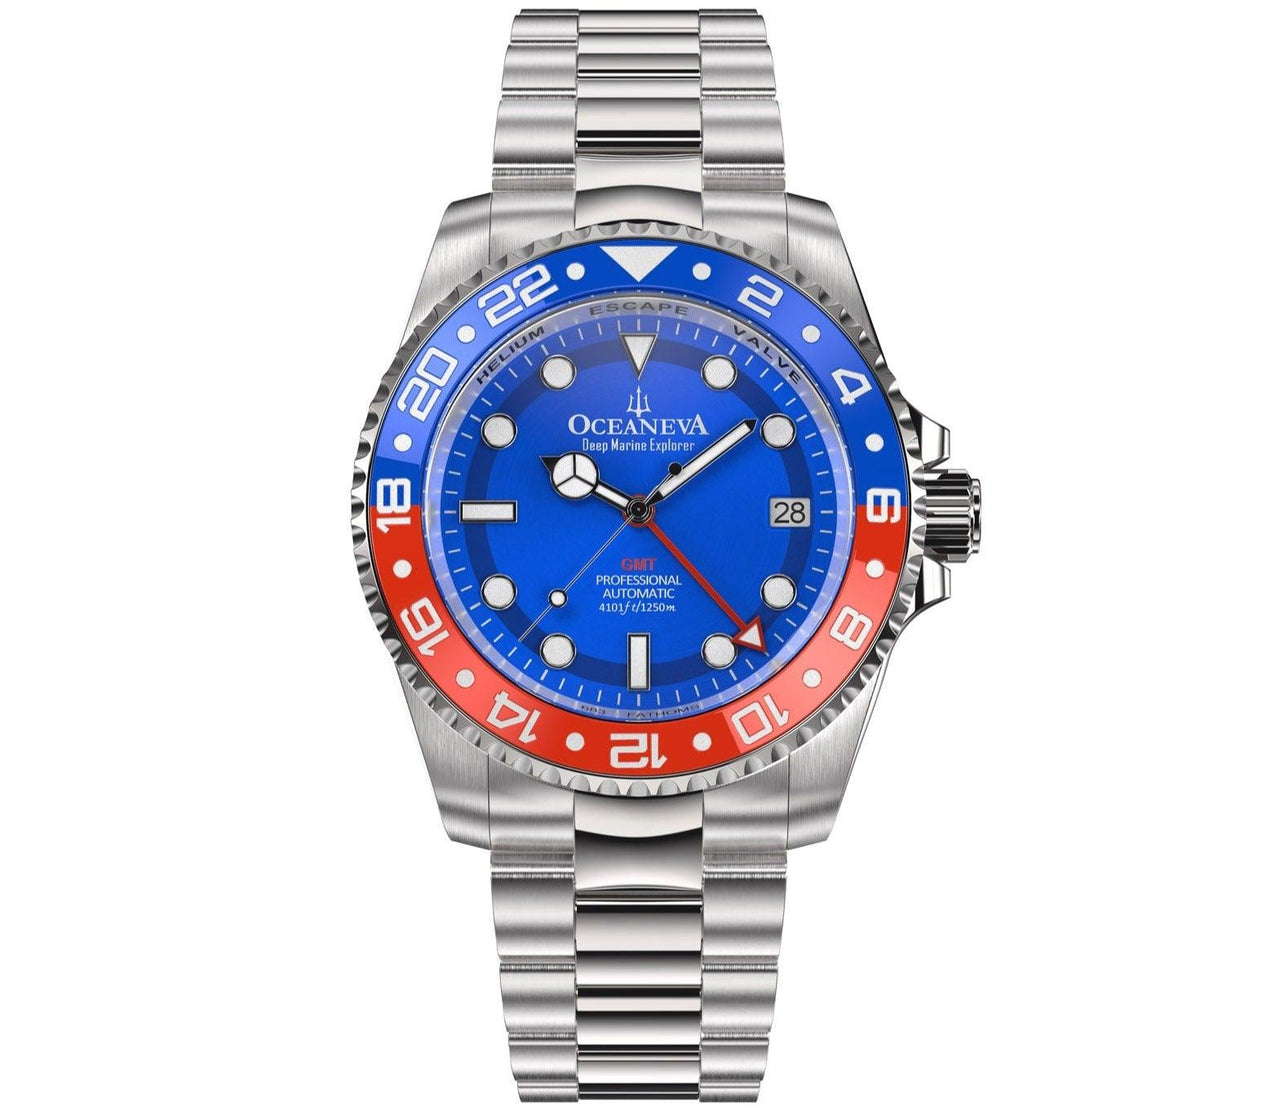 Oceaneva™ Deep Marine Explorer GMT Automatic 1250M Men's Watch - BL.RD.NH.BL.GMT.ST automatic GMT watch, Automatic watches, Diver GMT, GMT Dive Watch, men's gmt watches